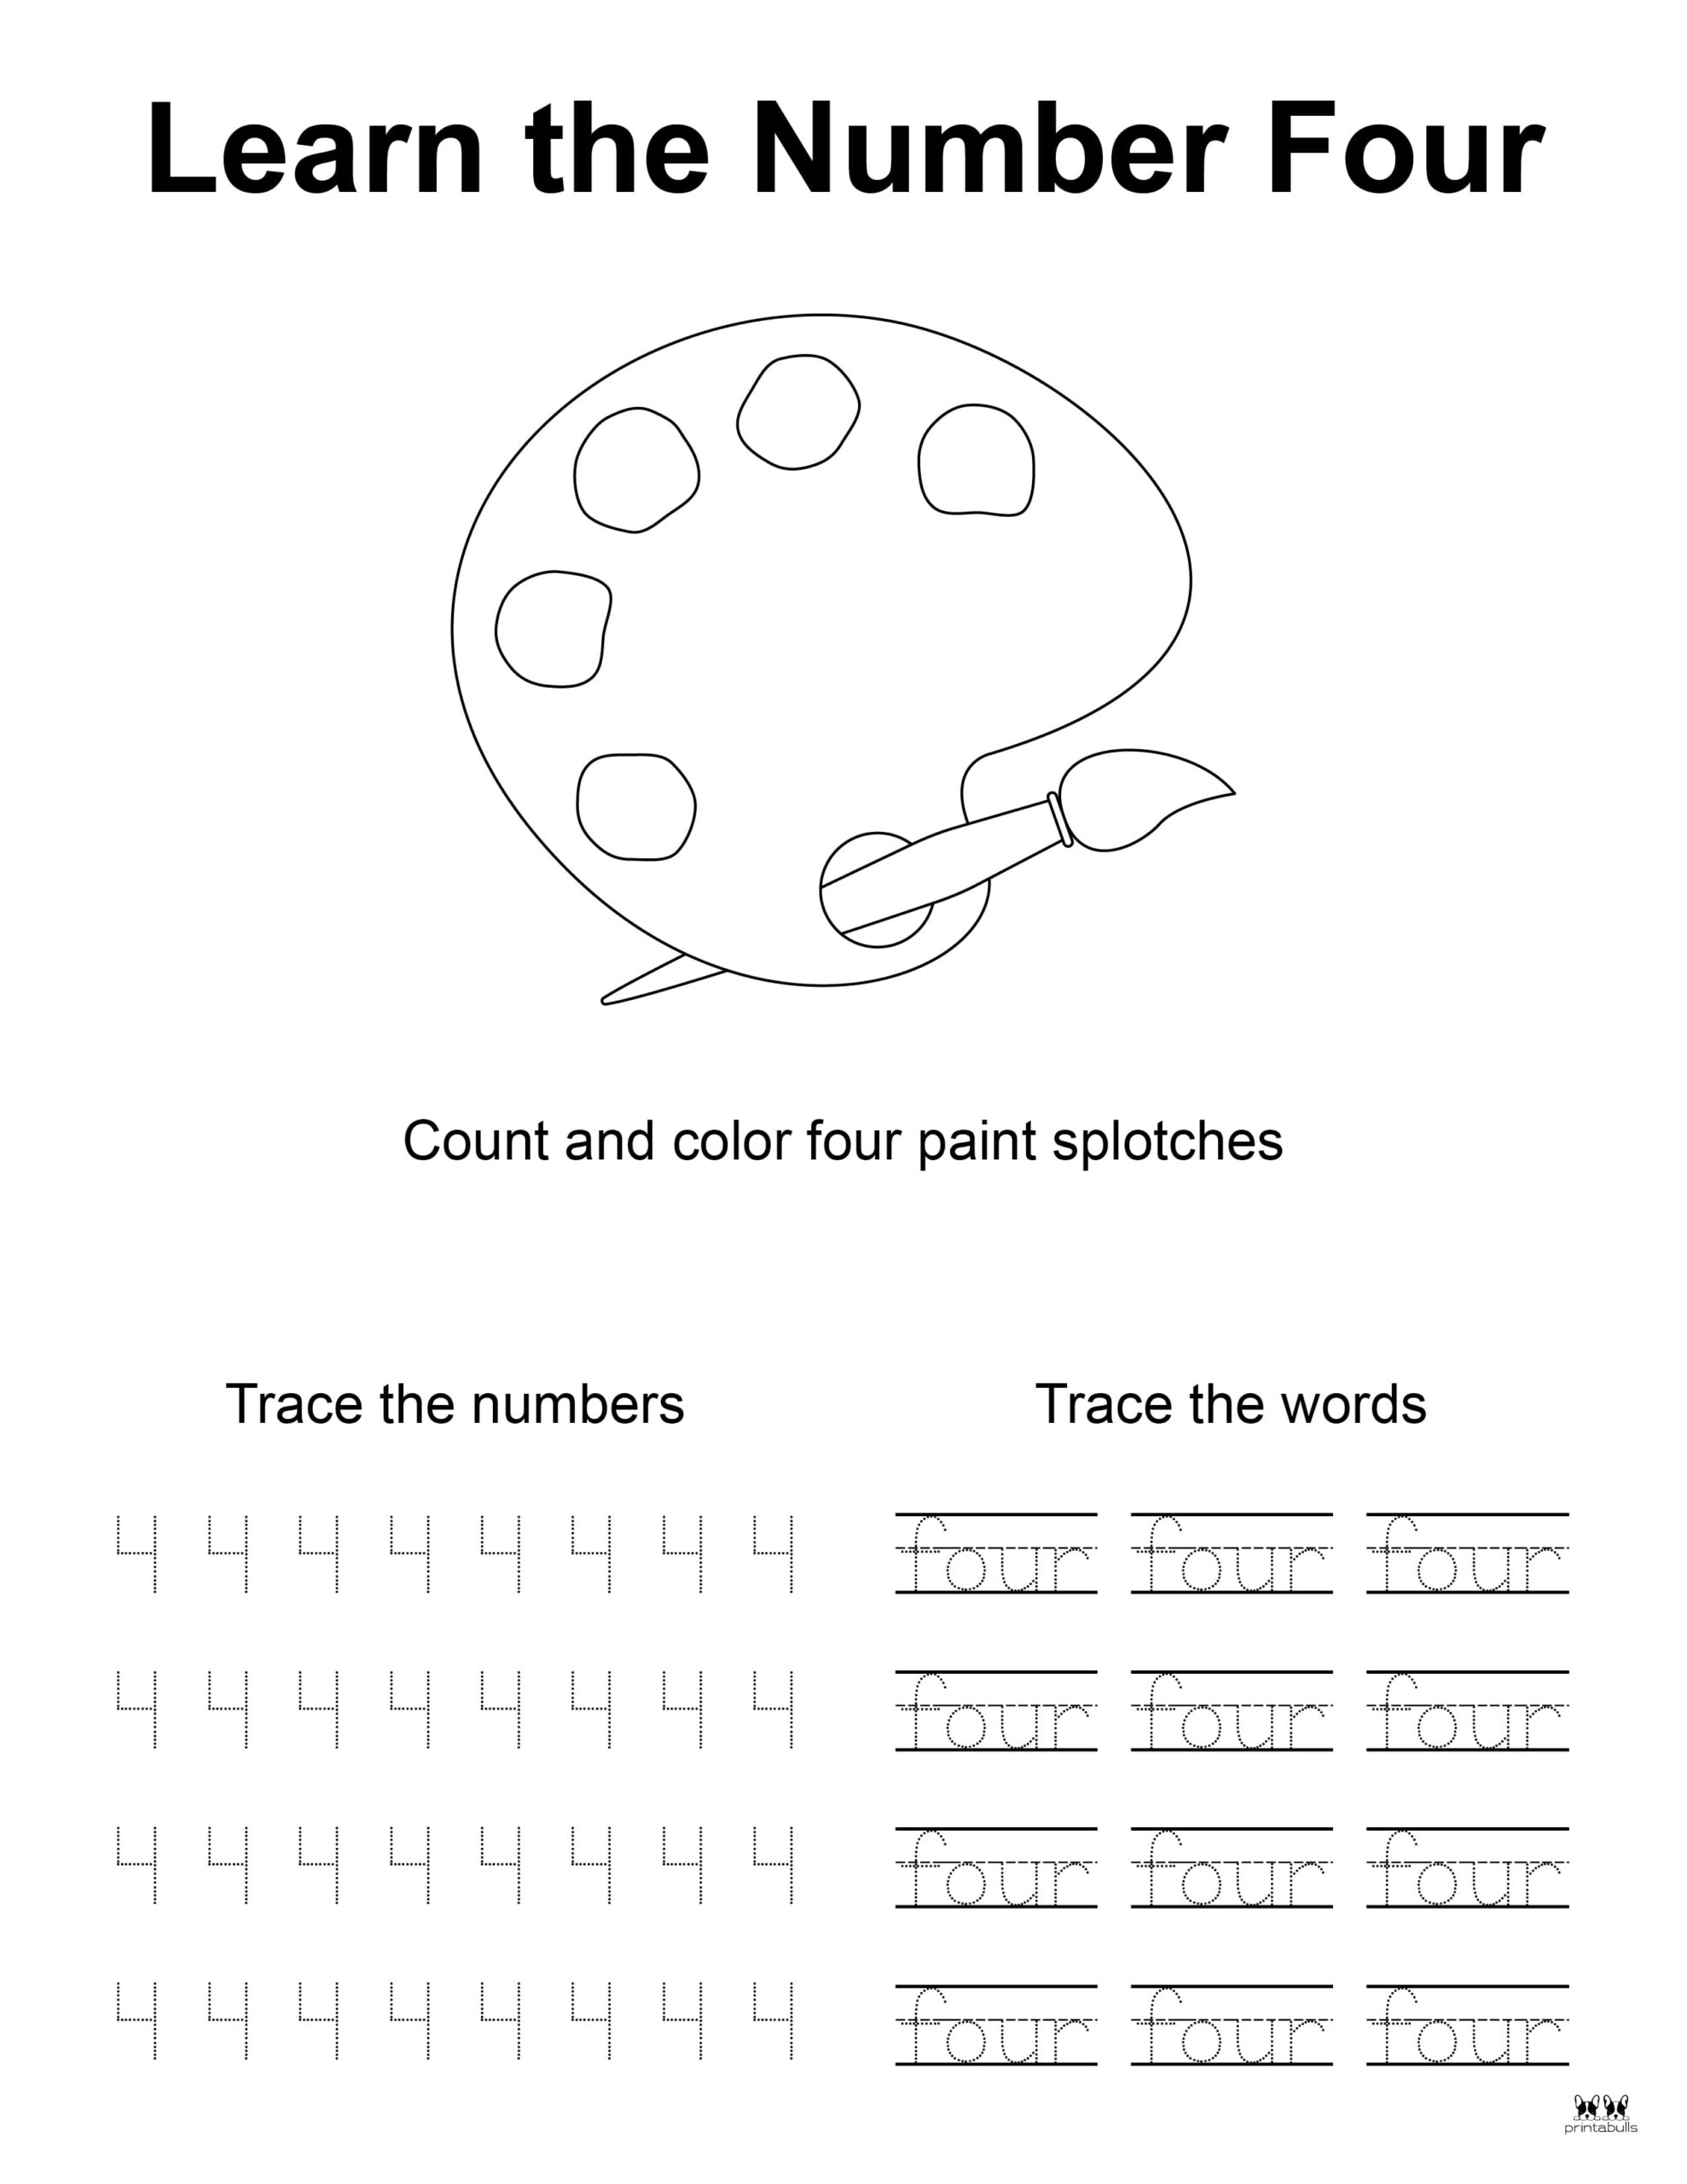 number-4-tracing-worksheets-15-free-pages-printabulls